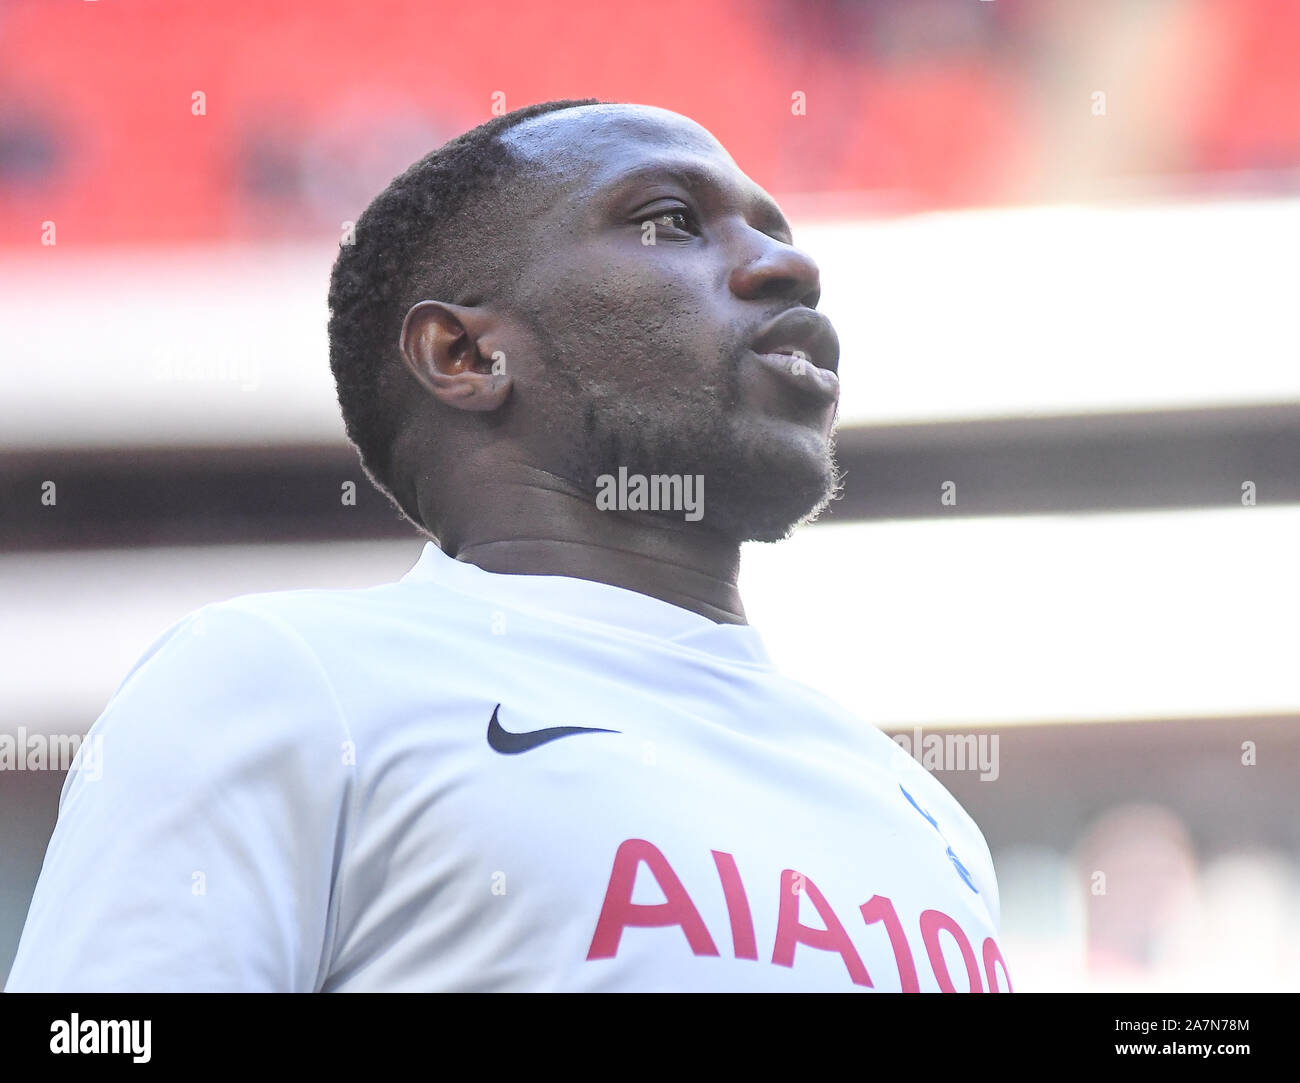 LONDON, ENGLAND - MARCH 2, 2019: Moussa Sissoko of Tottenham pictured ahead of the 2018/19 Premier League game between Tottenham Hotspur and Arsenal FC at Wembley Stadium. Stock Photo